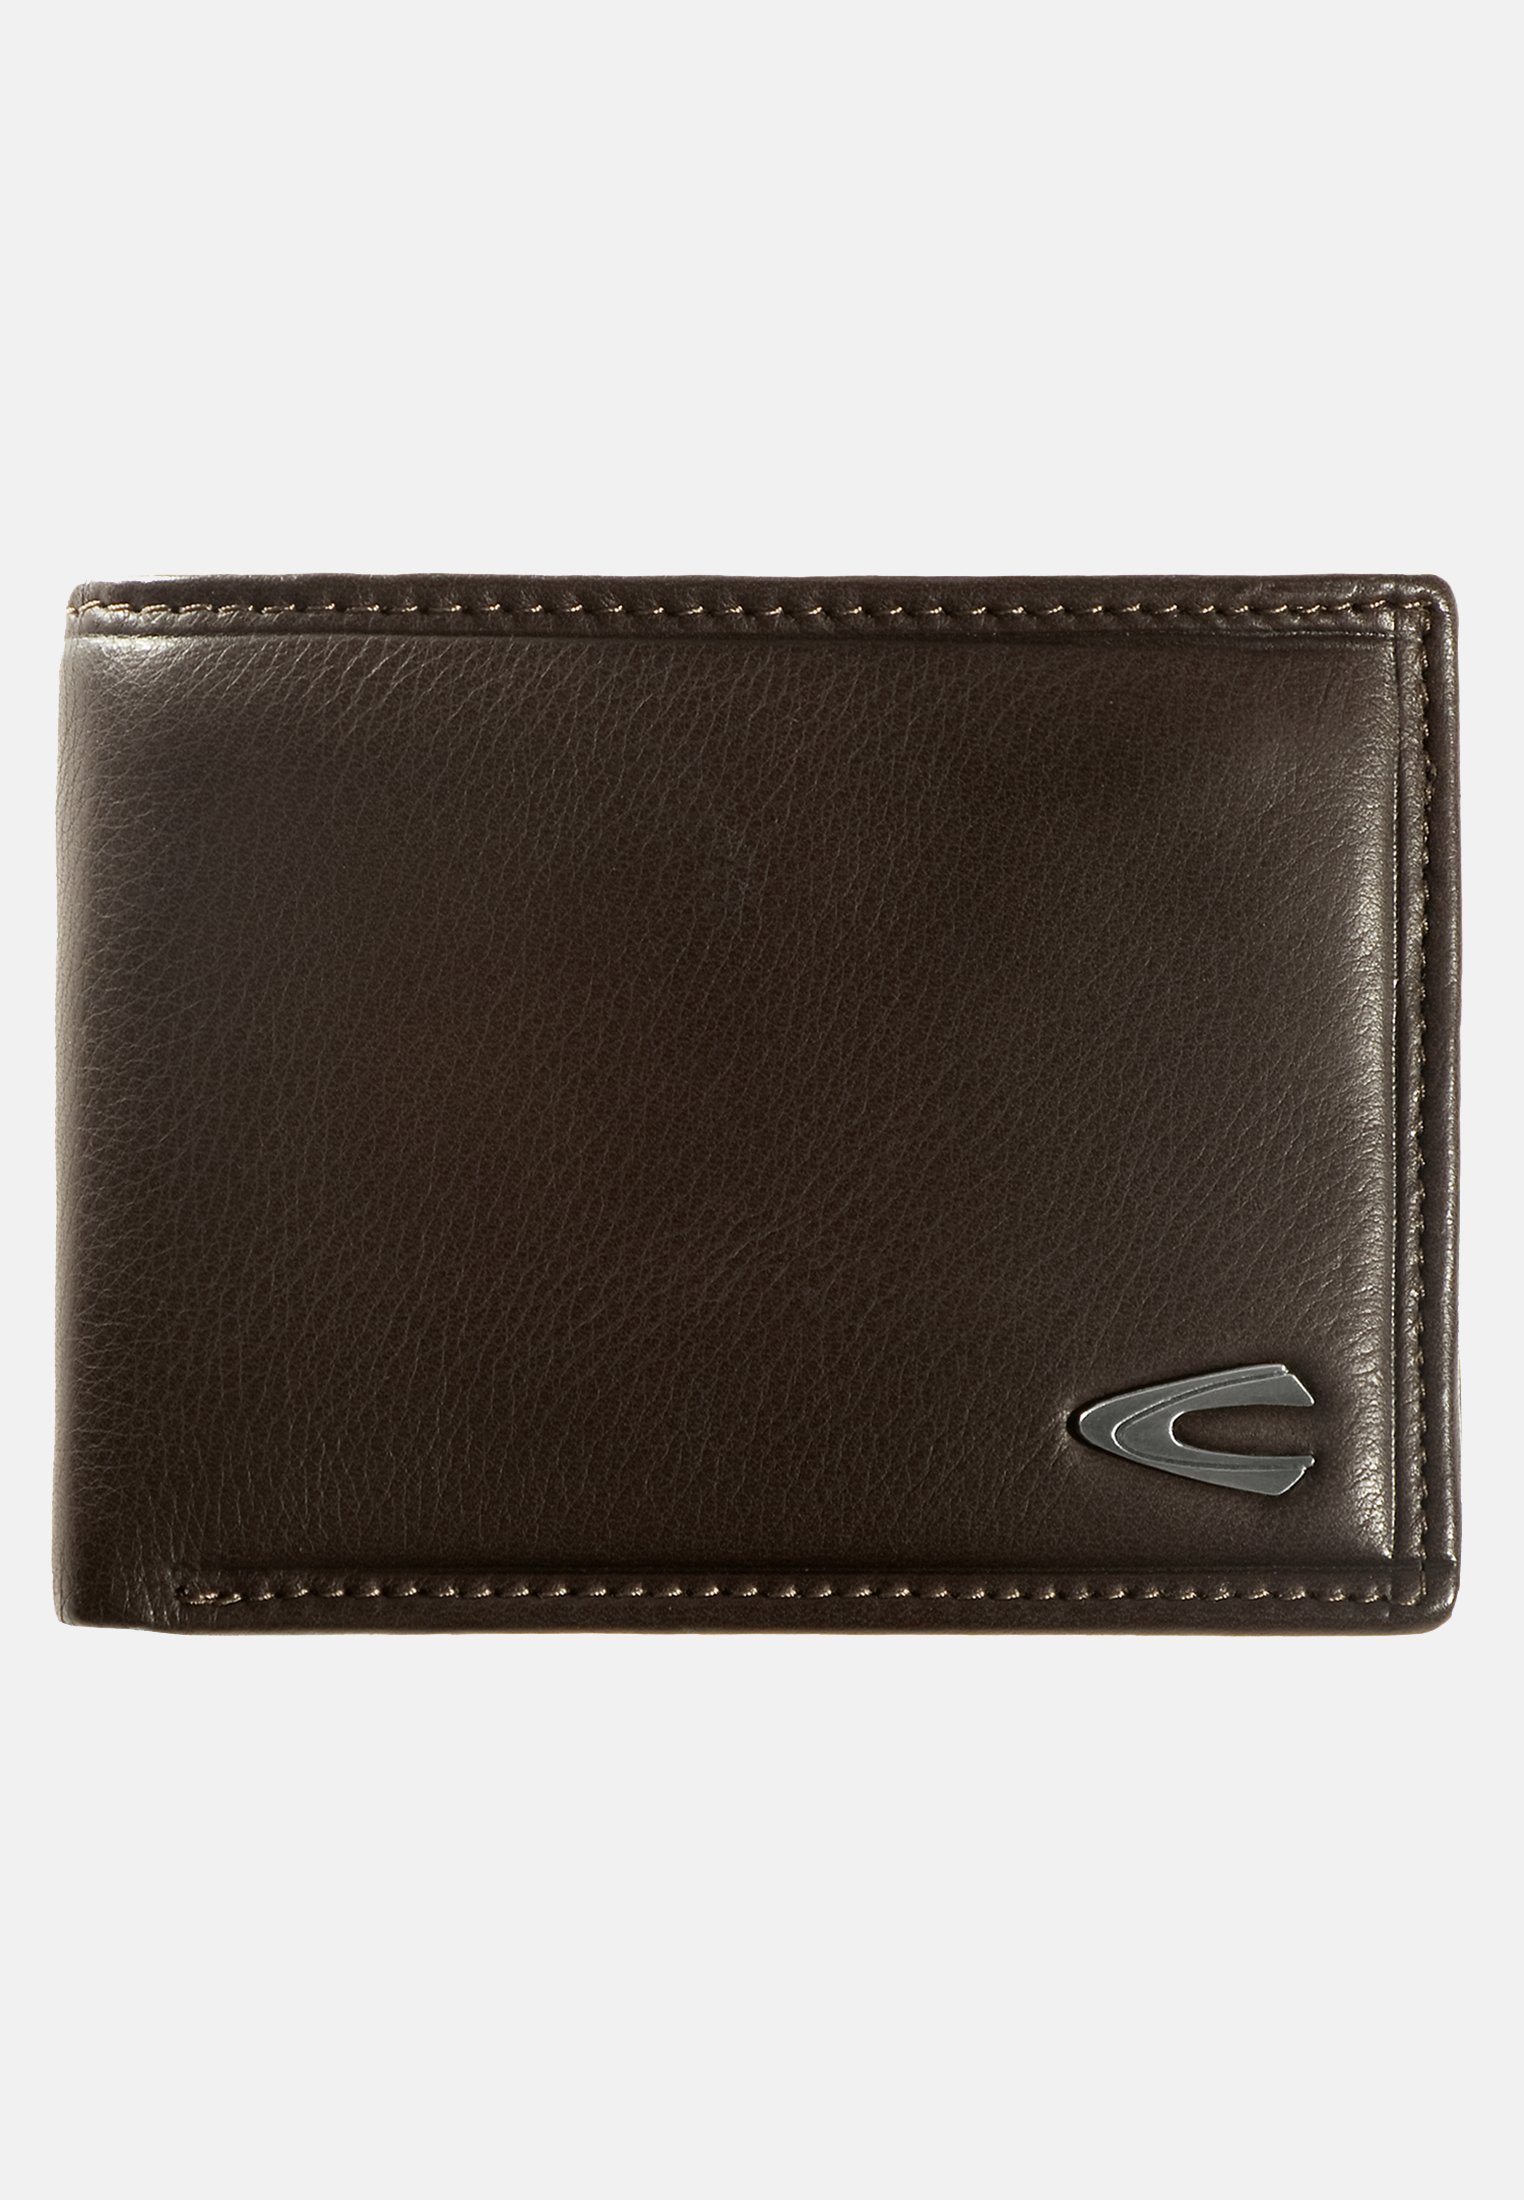 Camel Active Small wallet made of leather